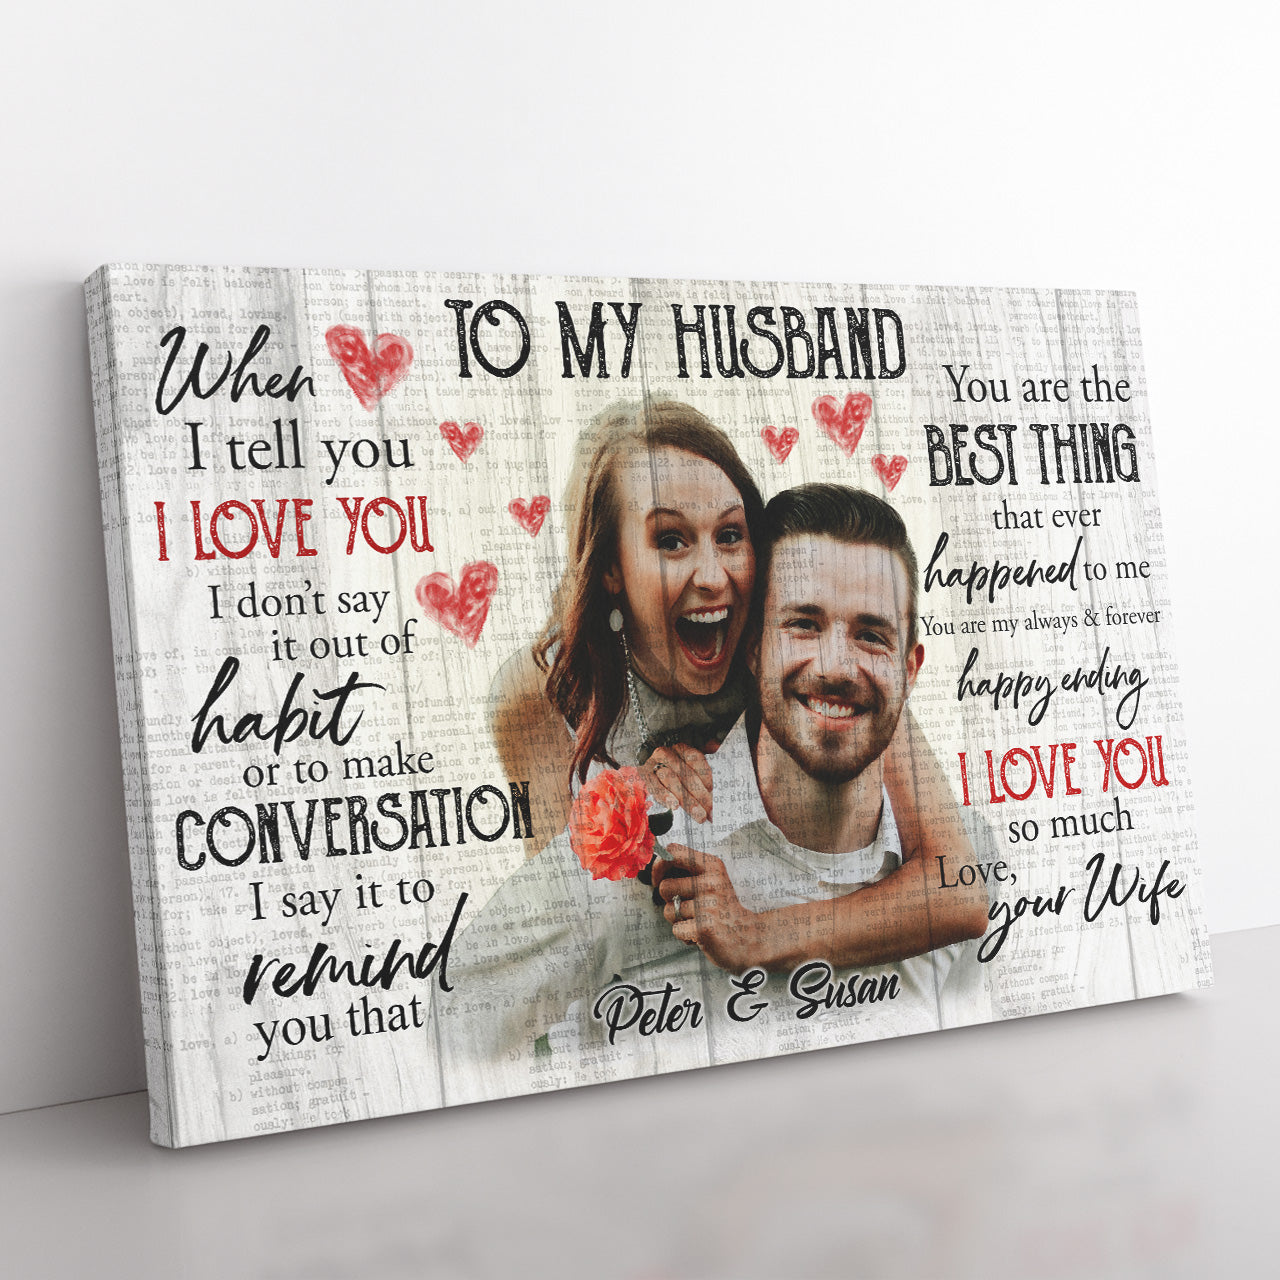 Personalized Canvas Gift For Him, Valentines Day Gifts For Him, Christmas Gift Ideas For Him 20121301